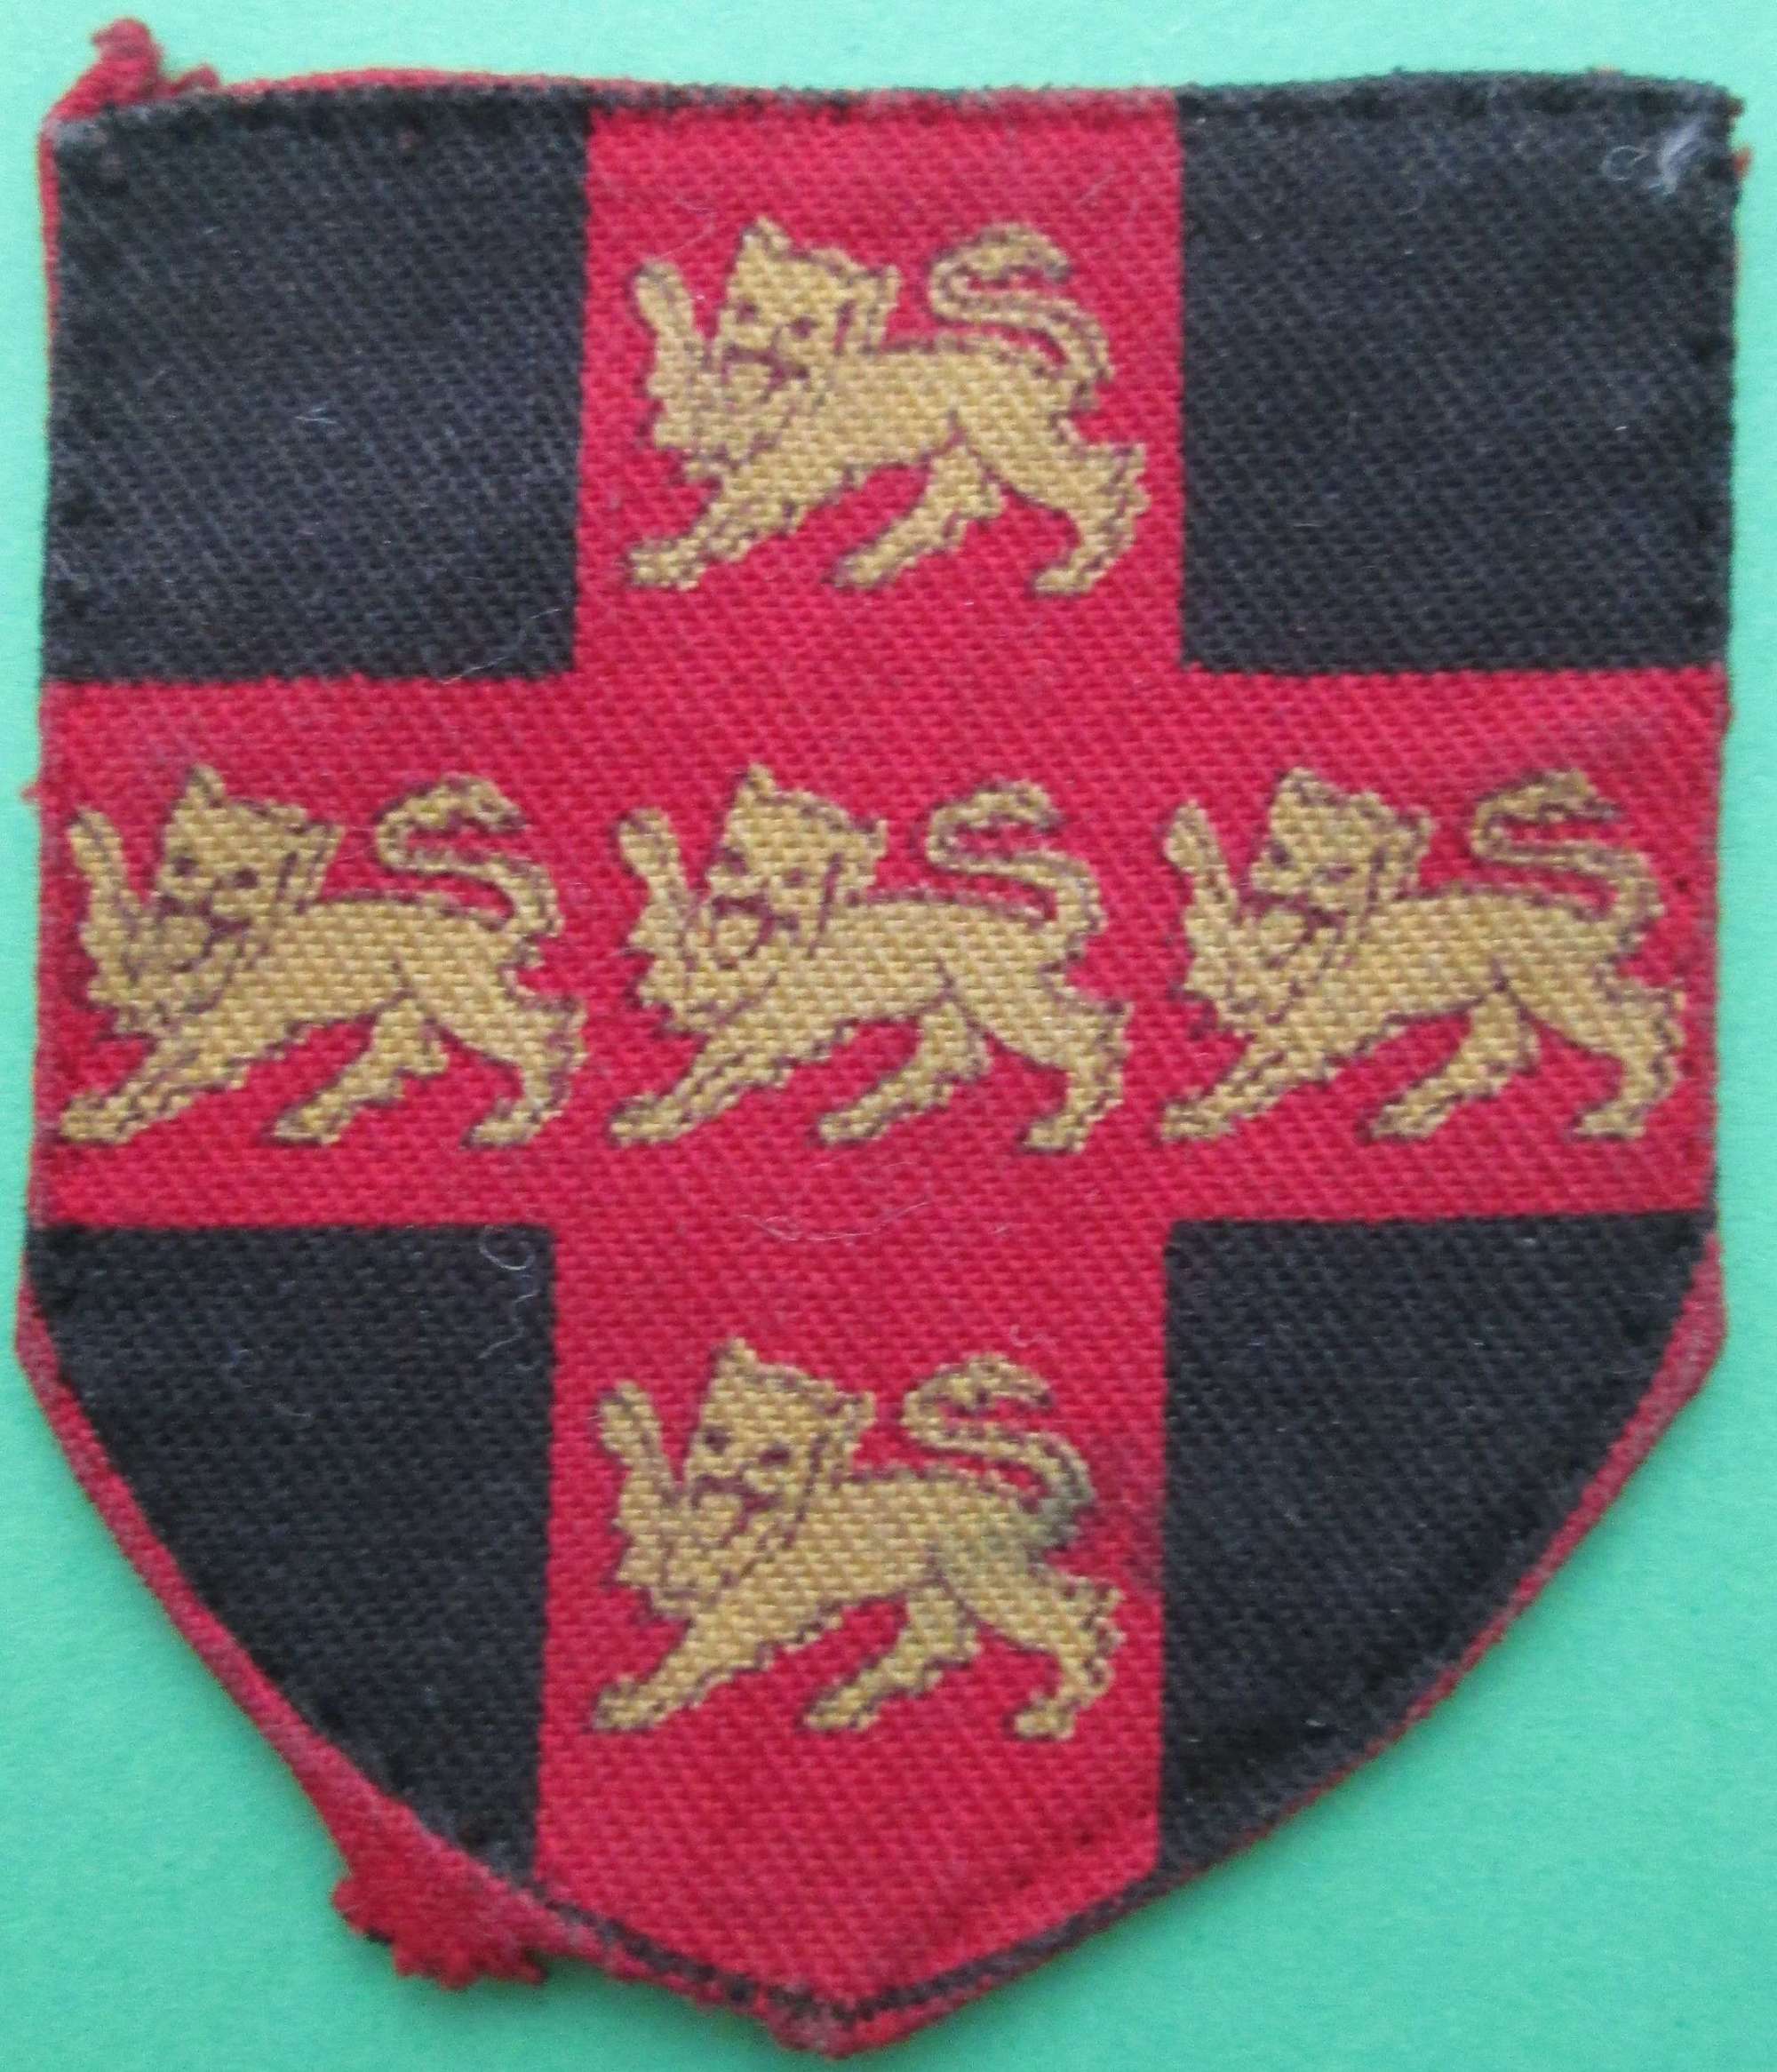 HOME COUNTIES NORTHERN COMMAND 2ND PATTERN FORMATION SIGN